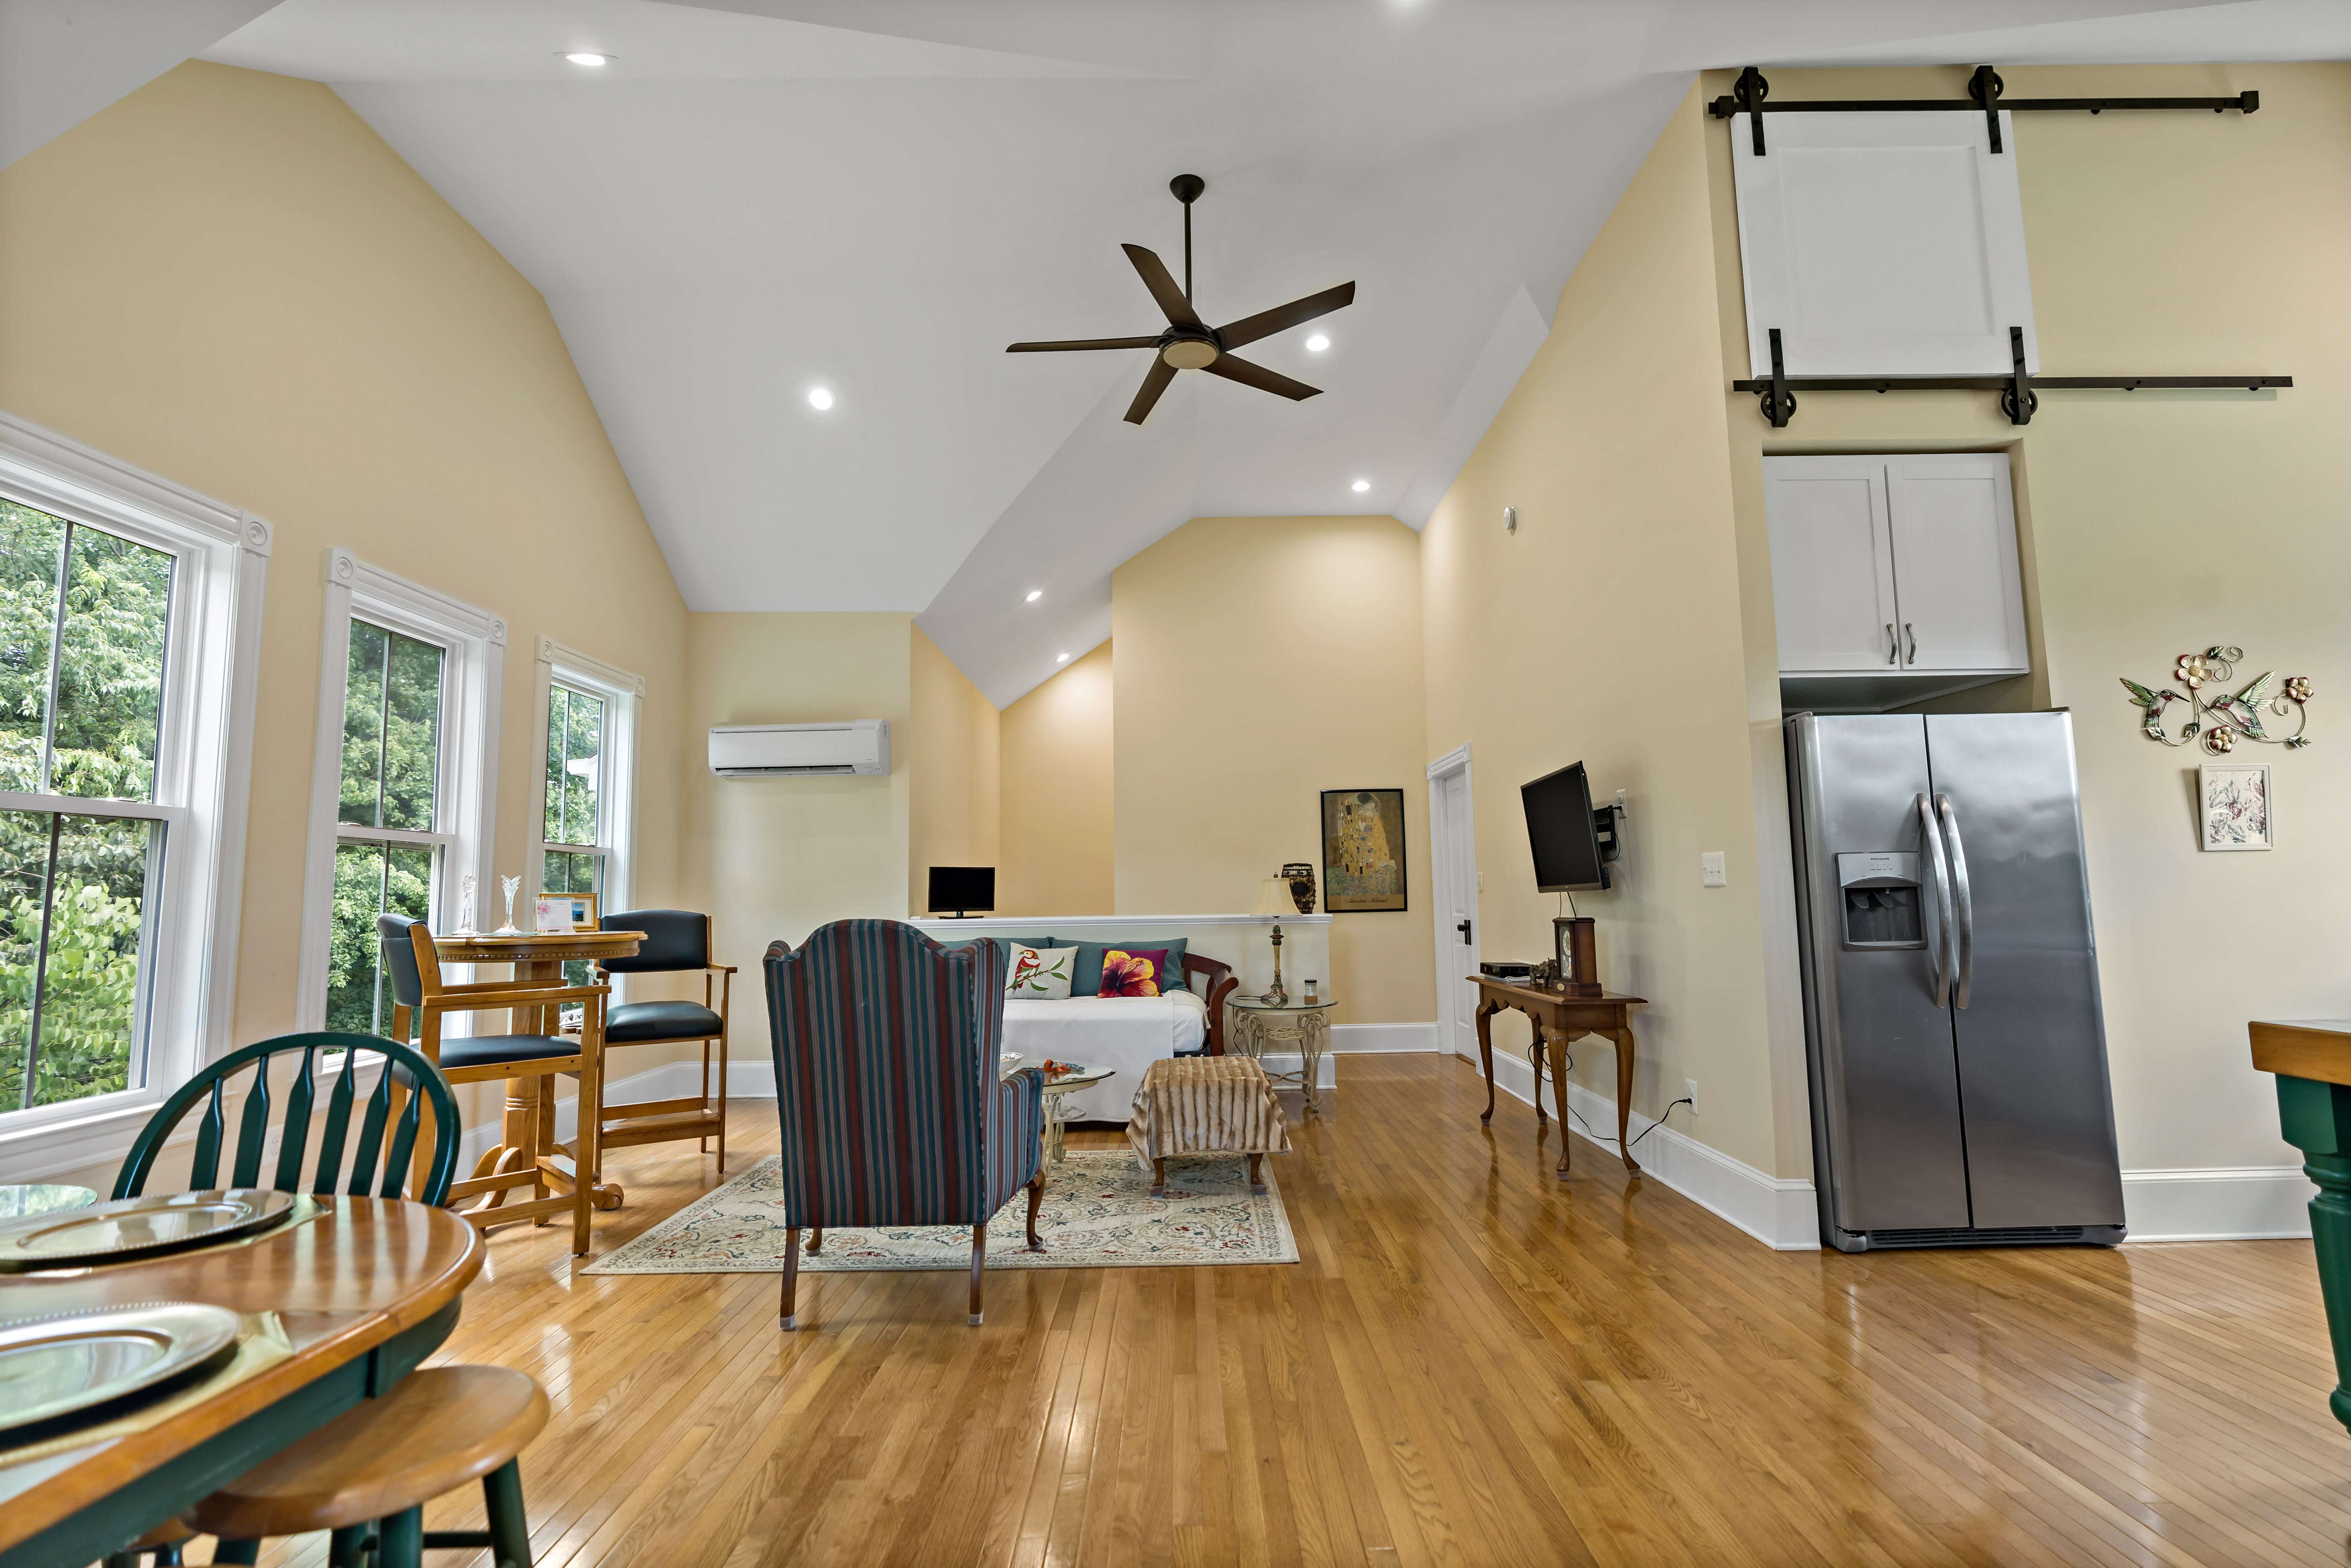 Tall ceilings in kitchen area with hard wood floors